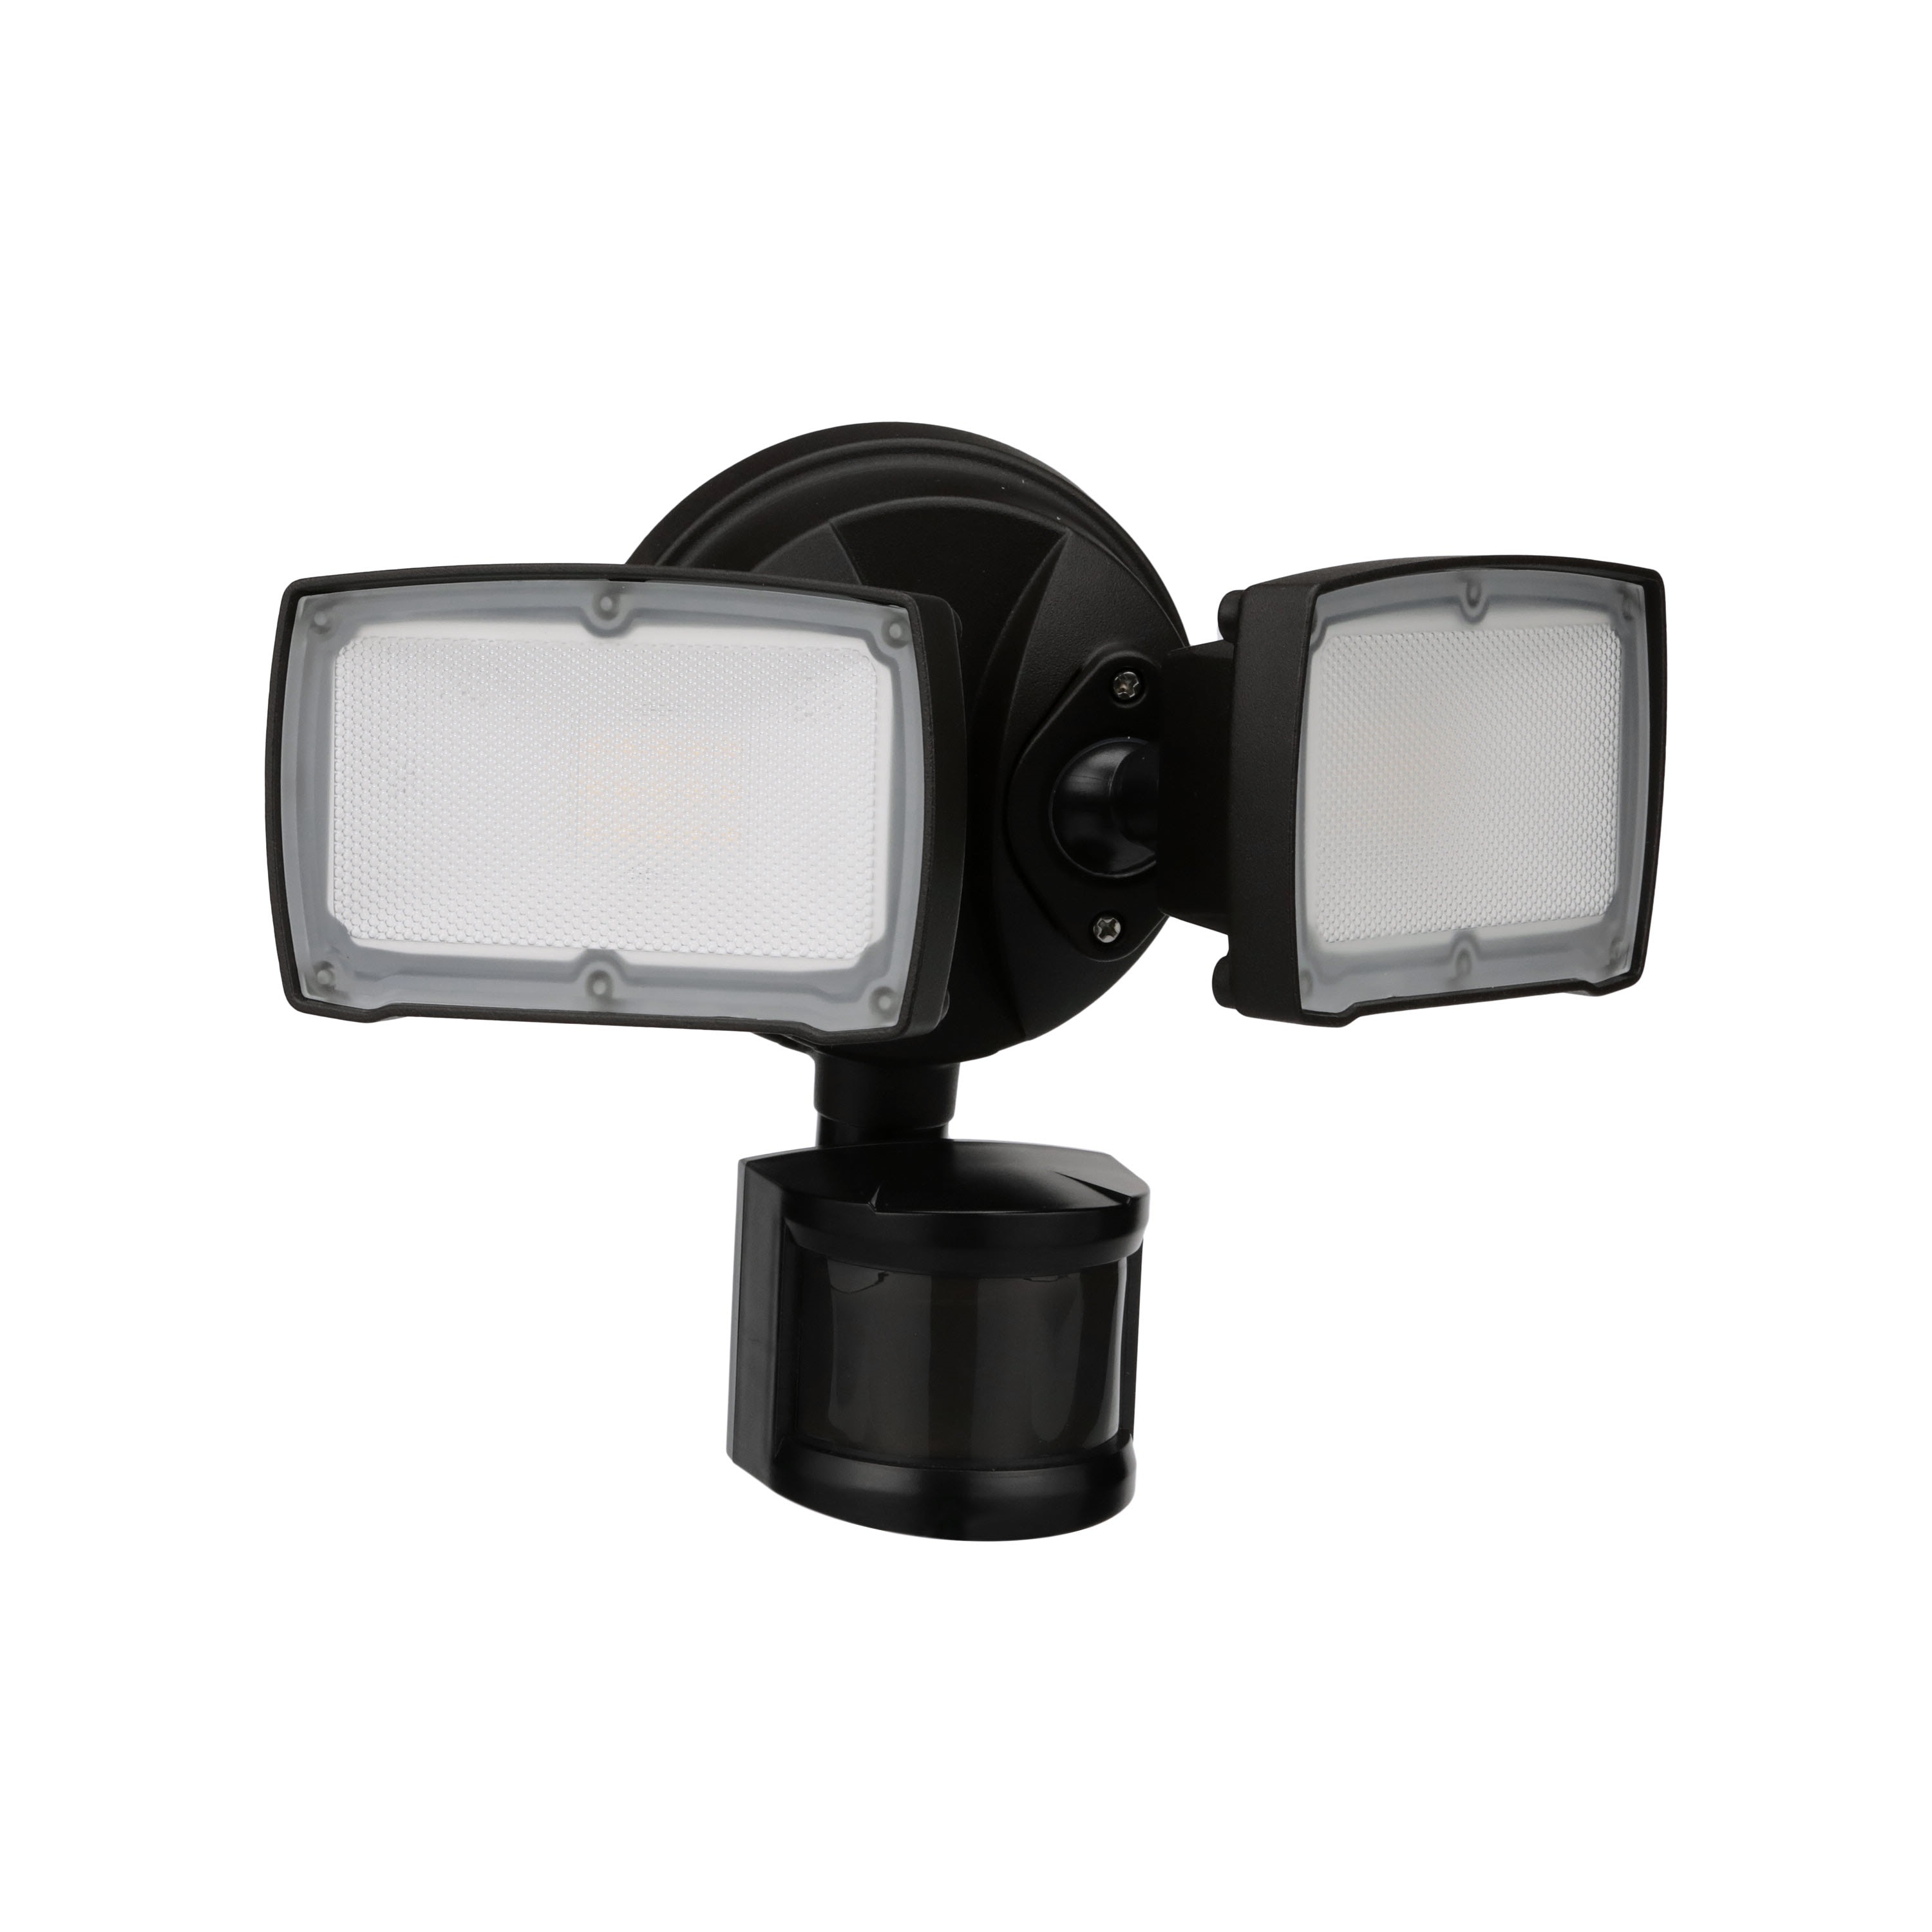 Good earth MOTION activated SECURITY light 2100 LUMENS DETECTS UP TO 70 FT 